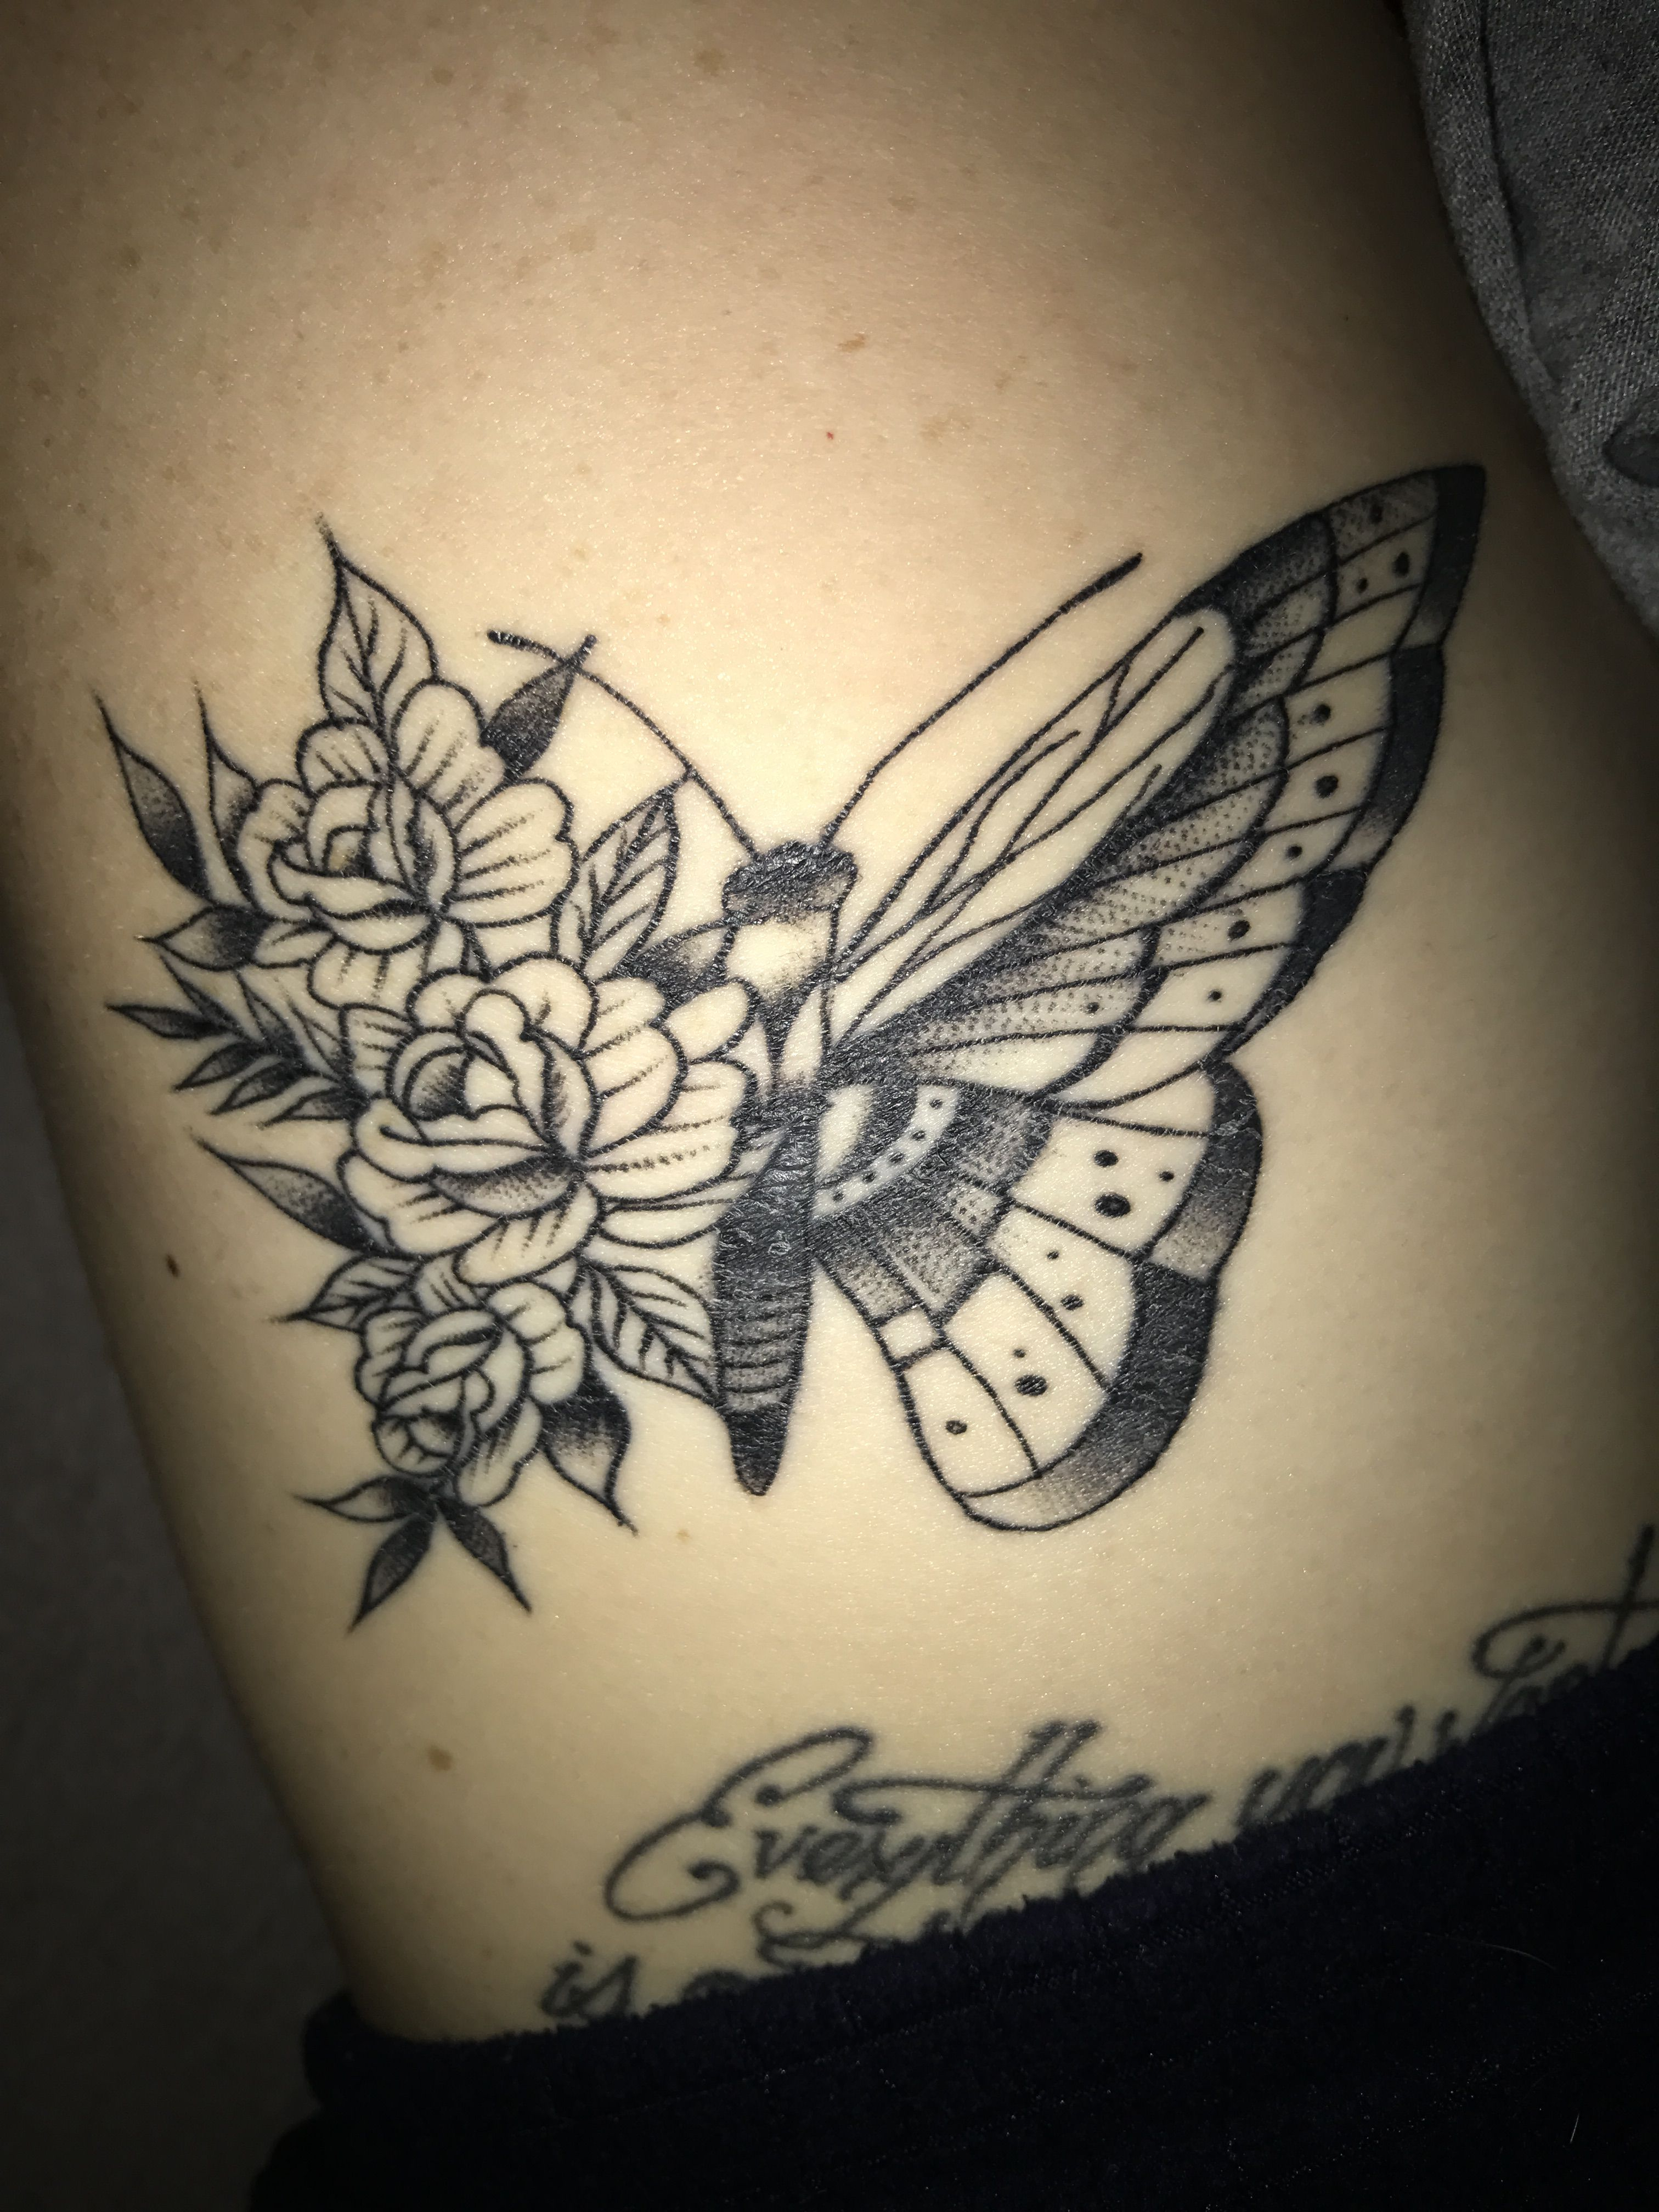 Butterfly Tattoo With Flower Wing Tattoos Tattoos Flowers Drawings in size 3024 X 4032